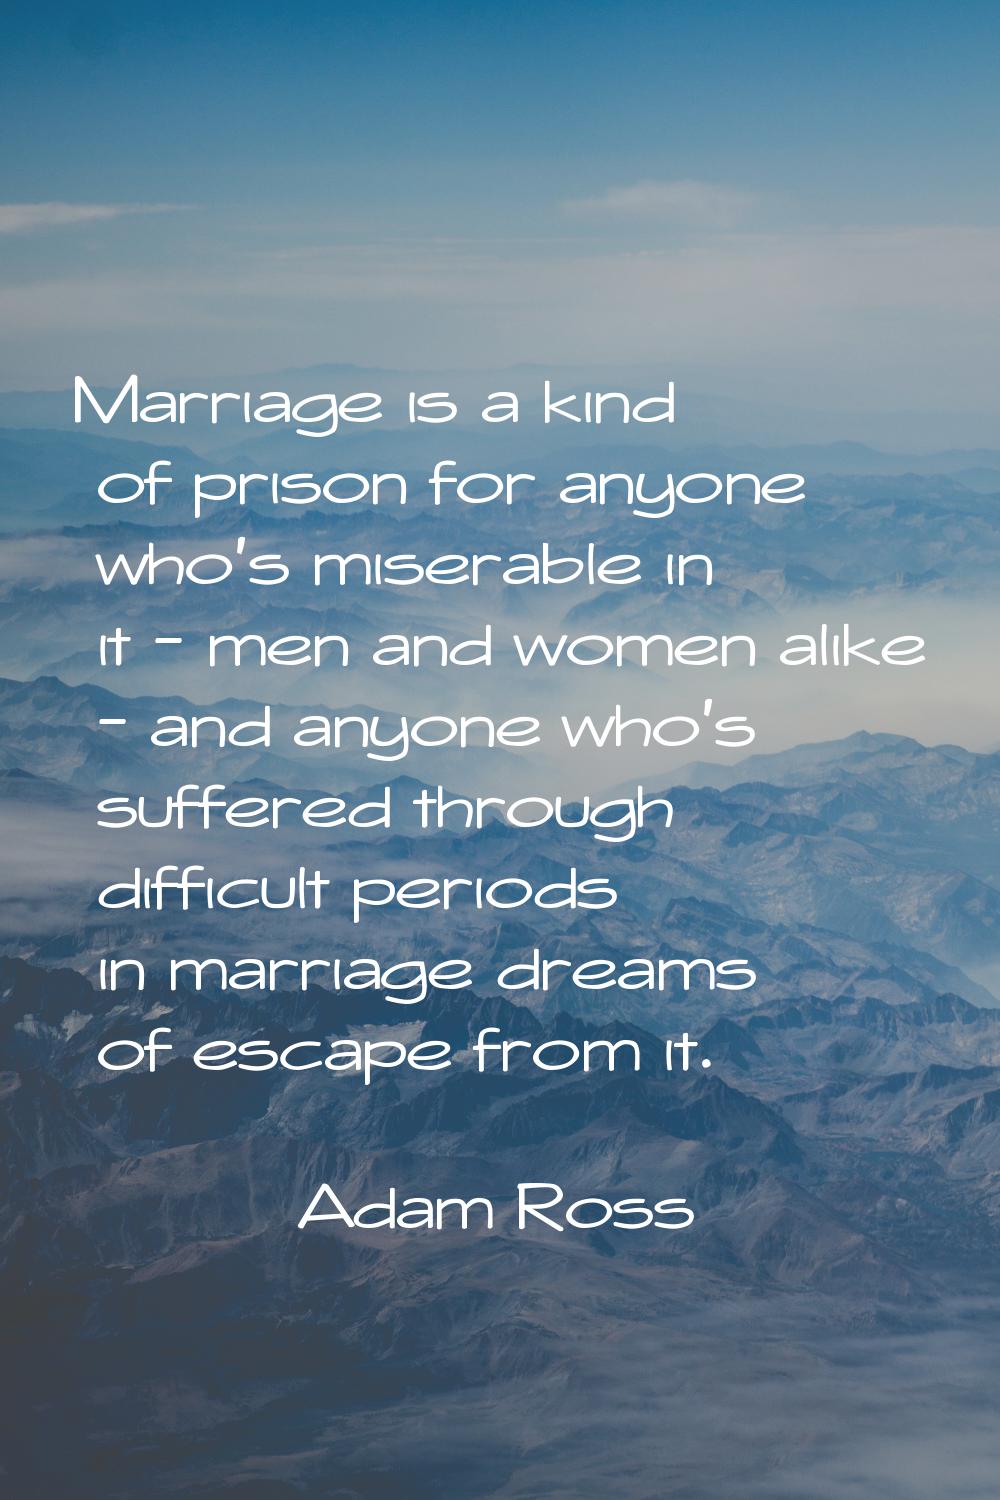 Marriage is a kind of prison for anyone who's miserable in it - men and women alike - and anyone wh